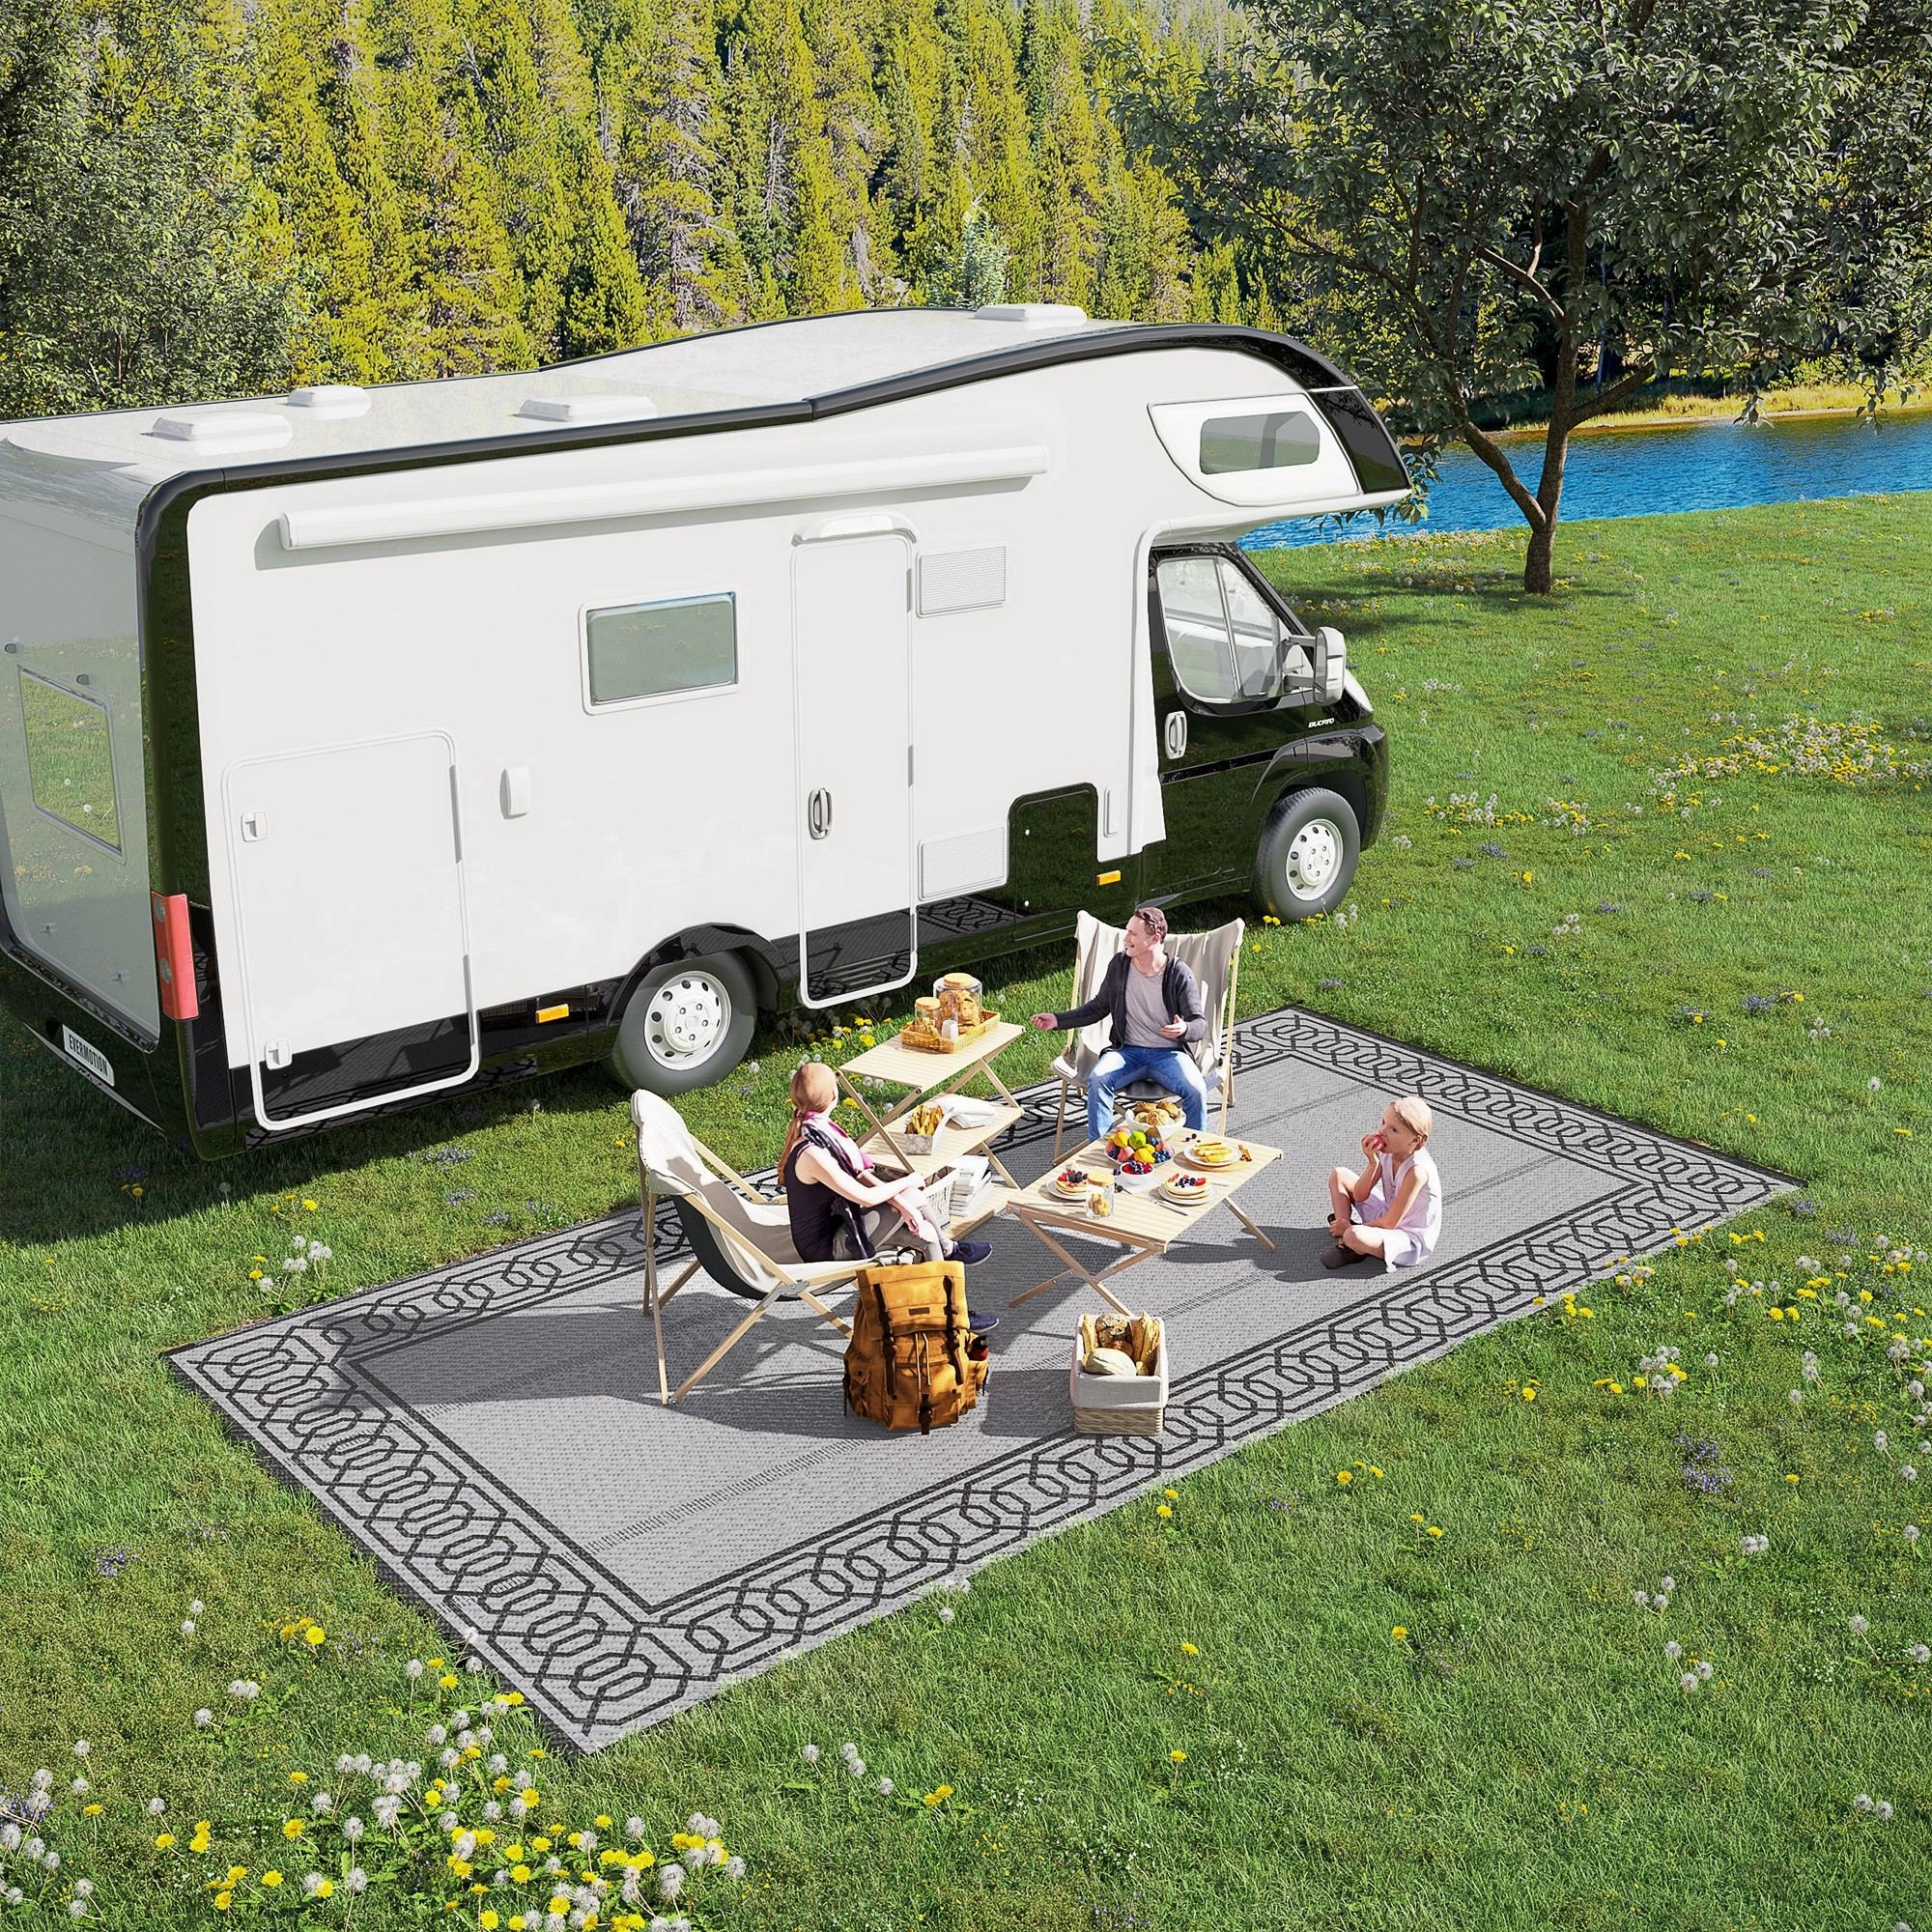 https://ak1.ostkcdn.com/images/products/is/images/direct/3b43a7ba0f910ebdb449f90f068d694d404e1d29/Outsunny-RV-Mat%2C-Outdoor-Patio-Rug---Large-Camping-Carpet-with-Carrying-Bag%2C-9%27-x-18%27%2C-Waterproof-Plastic-Straw.jpg